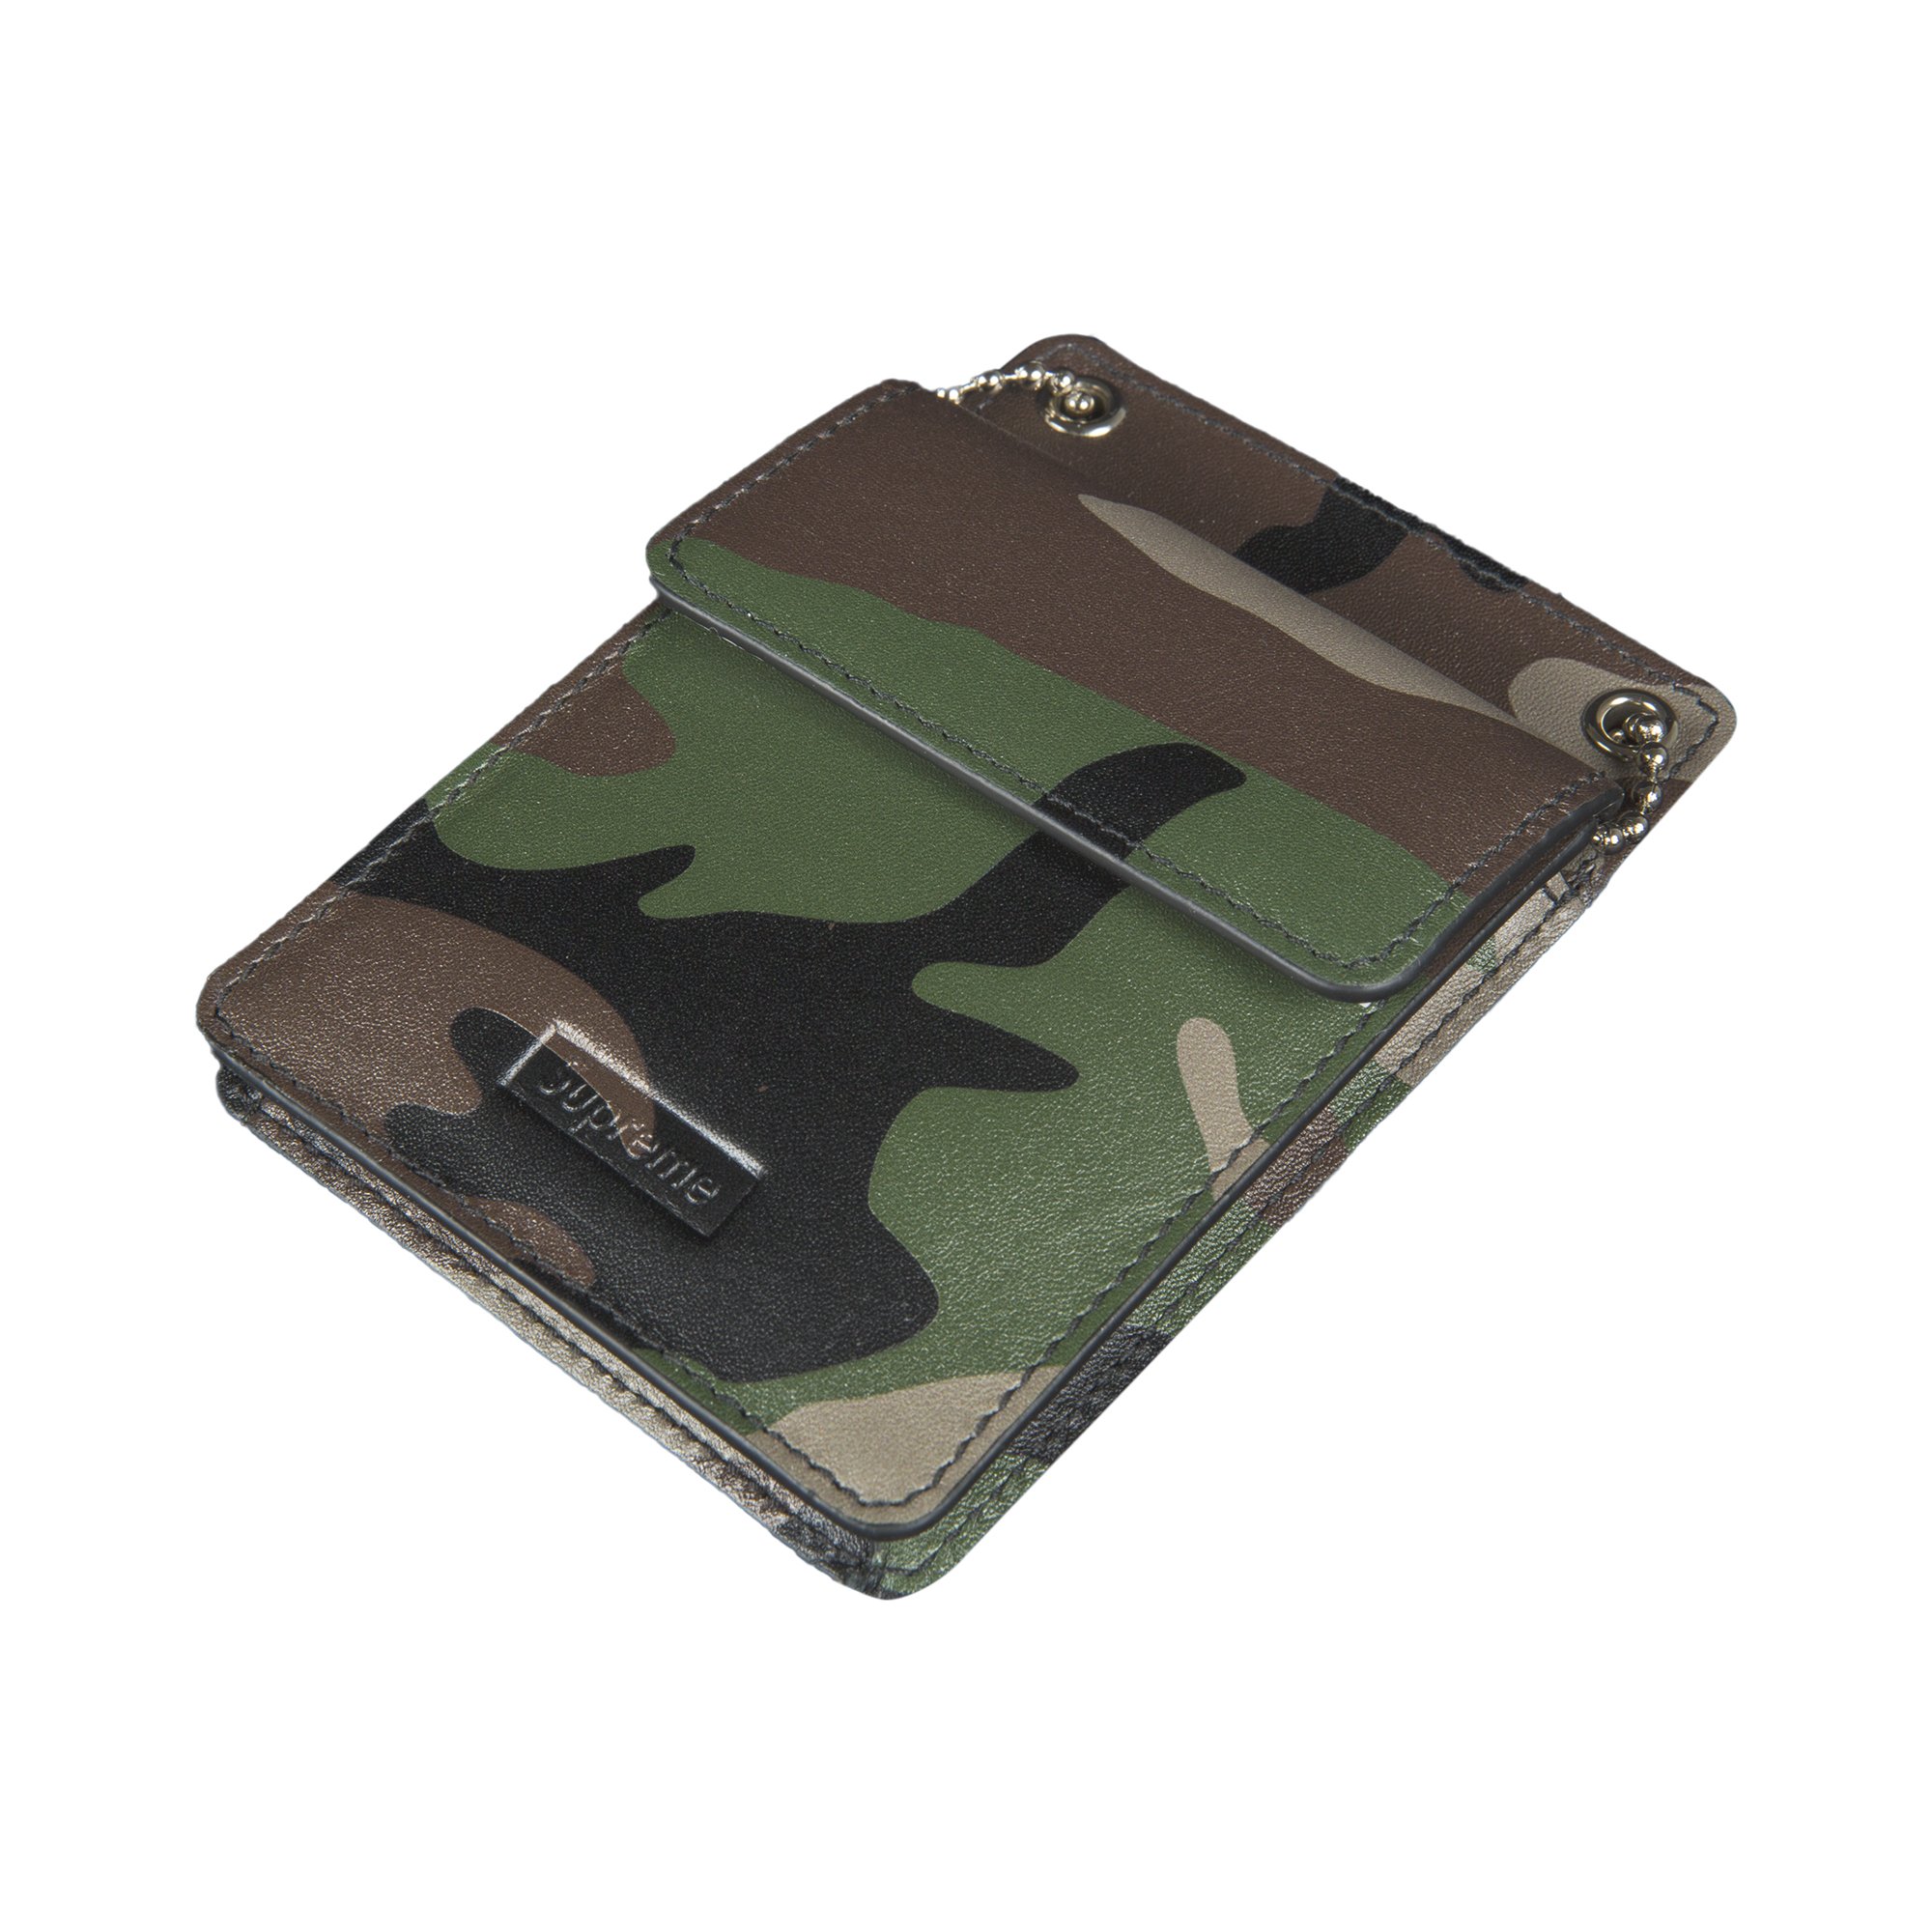 Buy Supreme Leather ID Holder and Wallet 'Camo' - FW18A30 CAMO | GOAT